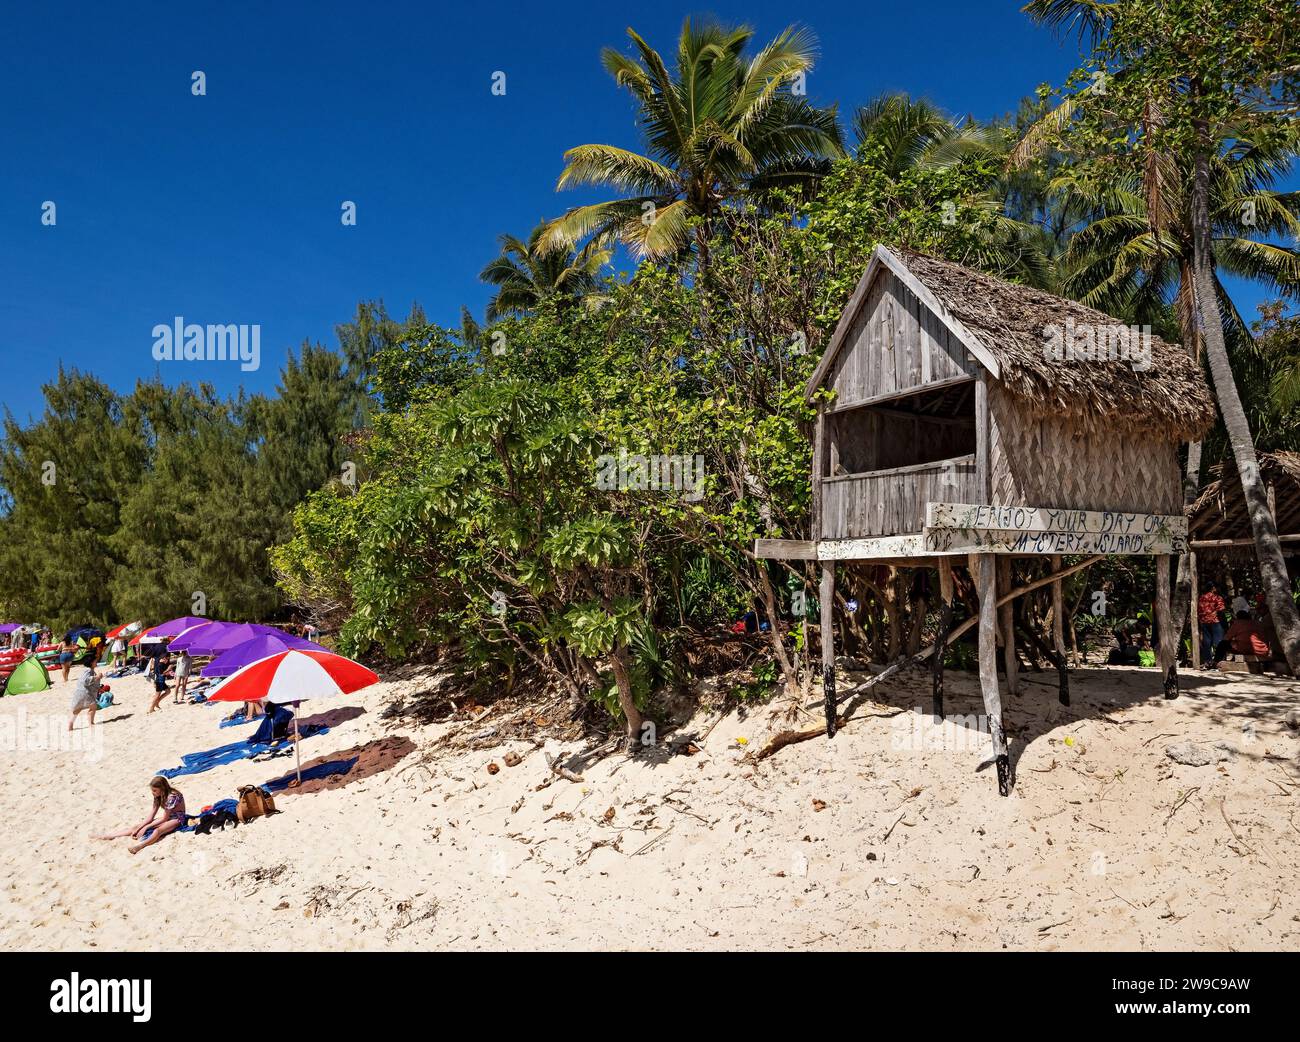 South Pacific Cruise /  Cruise ship passengers  from Carnival Splendor enjoy the white sandy beach on Mystery Island.After departing from Sydney Aus Stock Photo